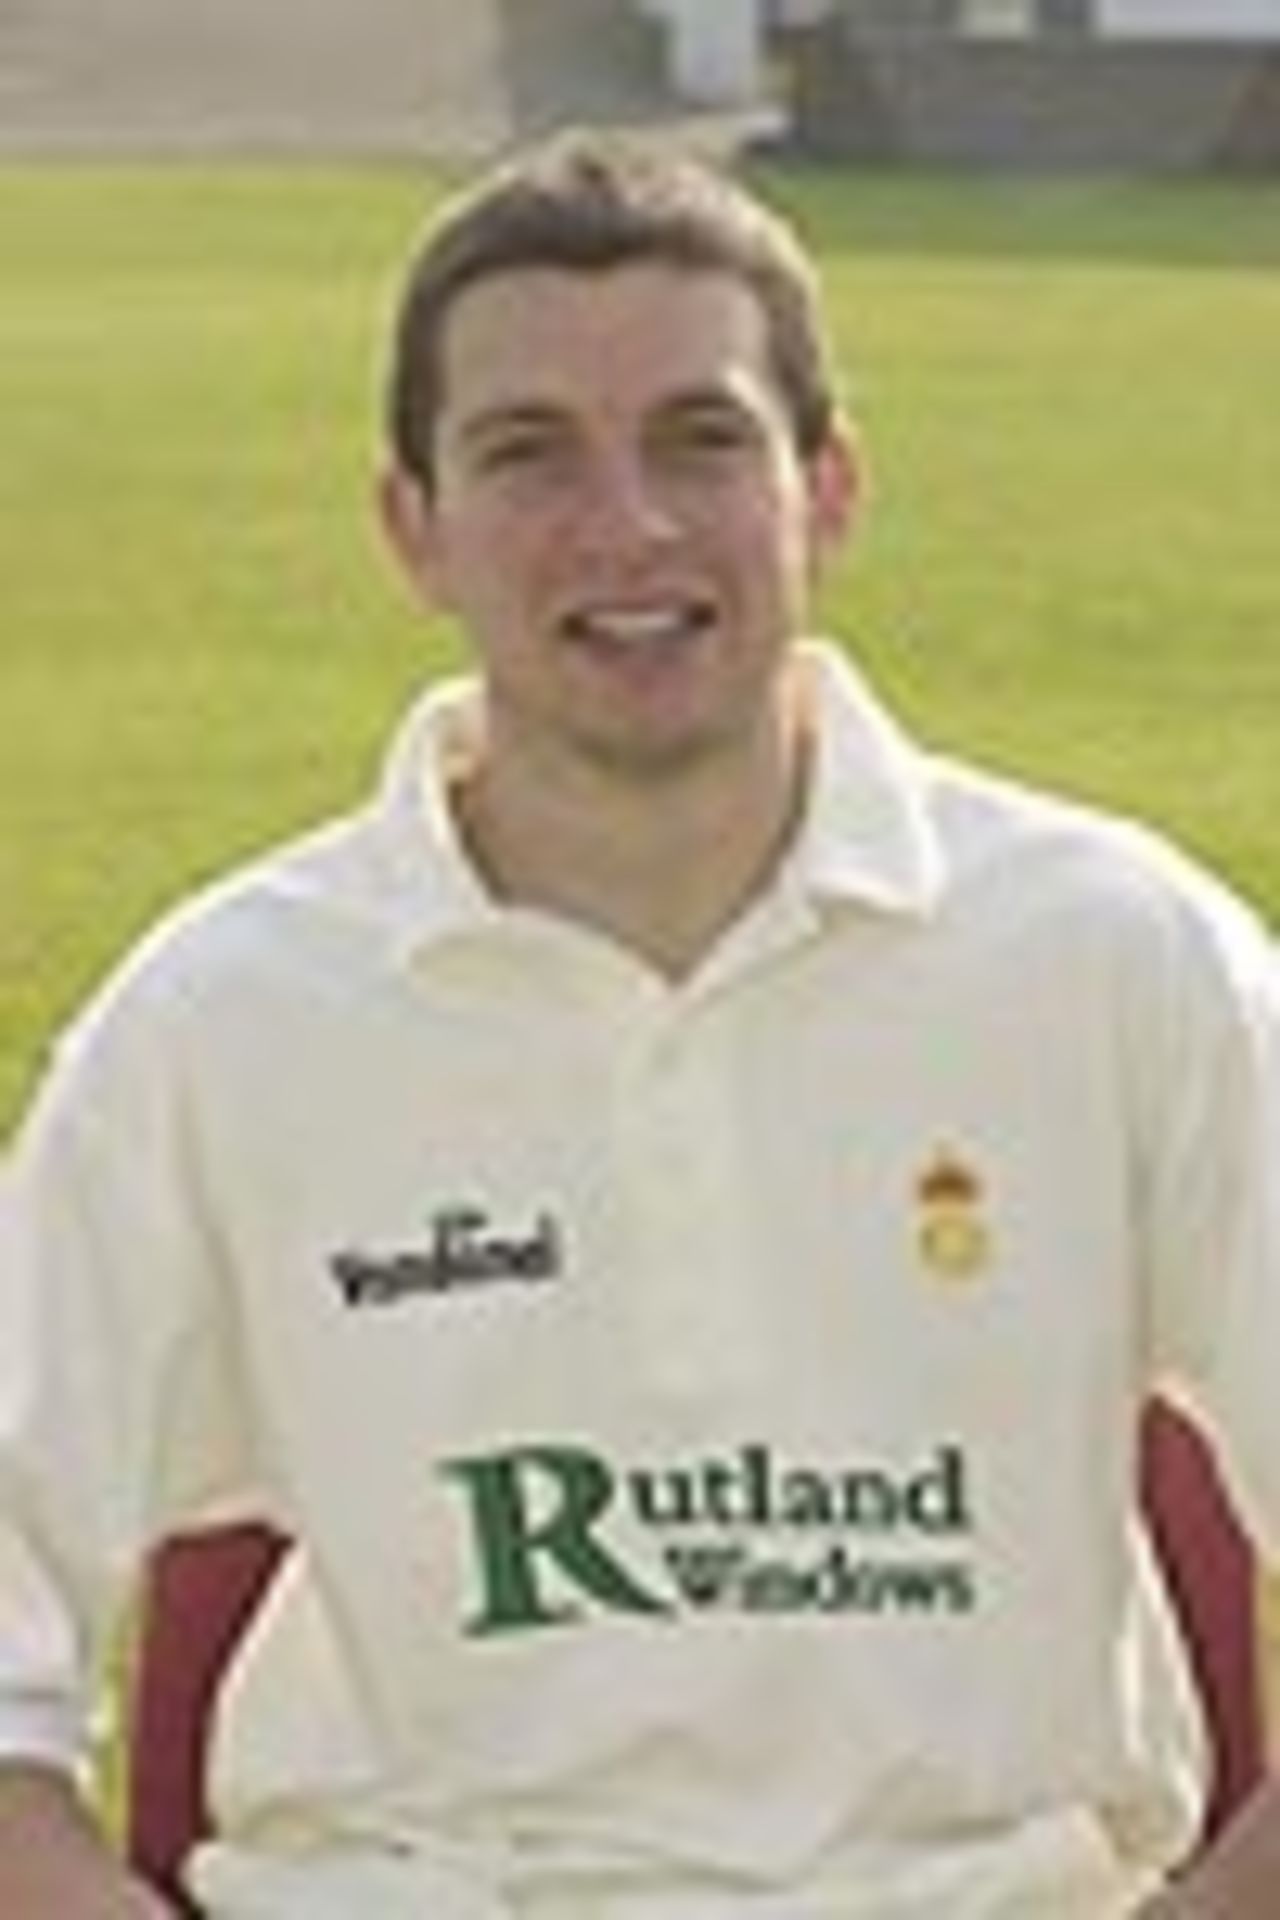 Taken at the 2002 Derbys CCC photocall